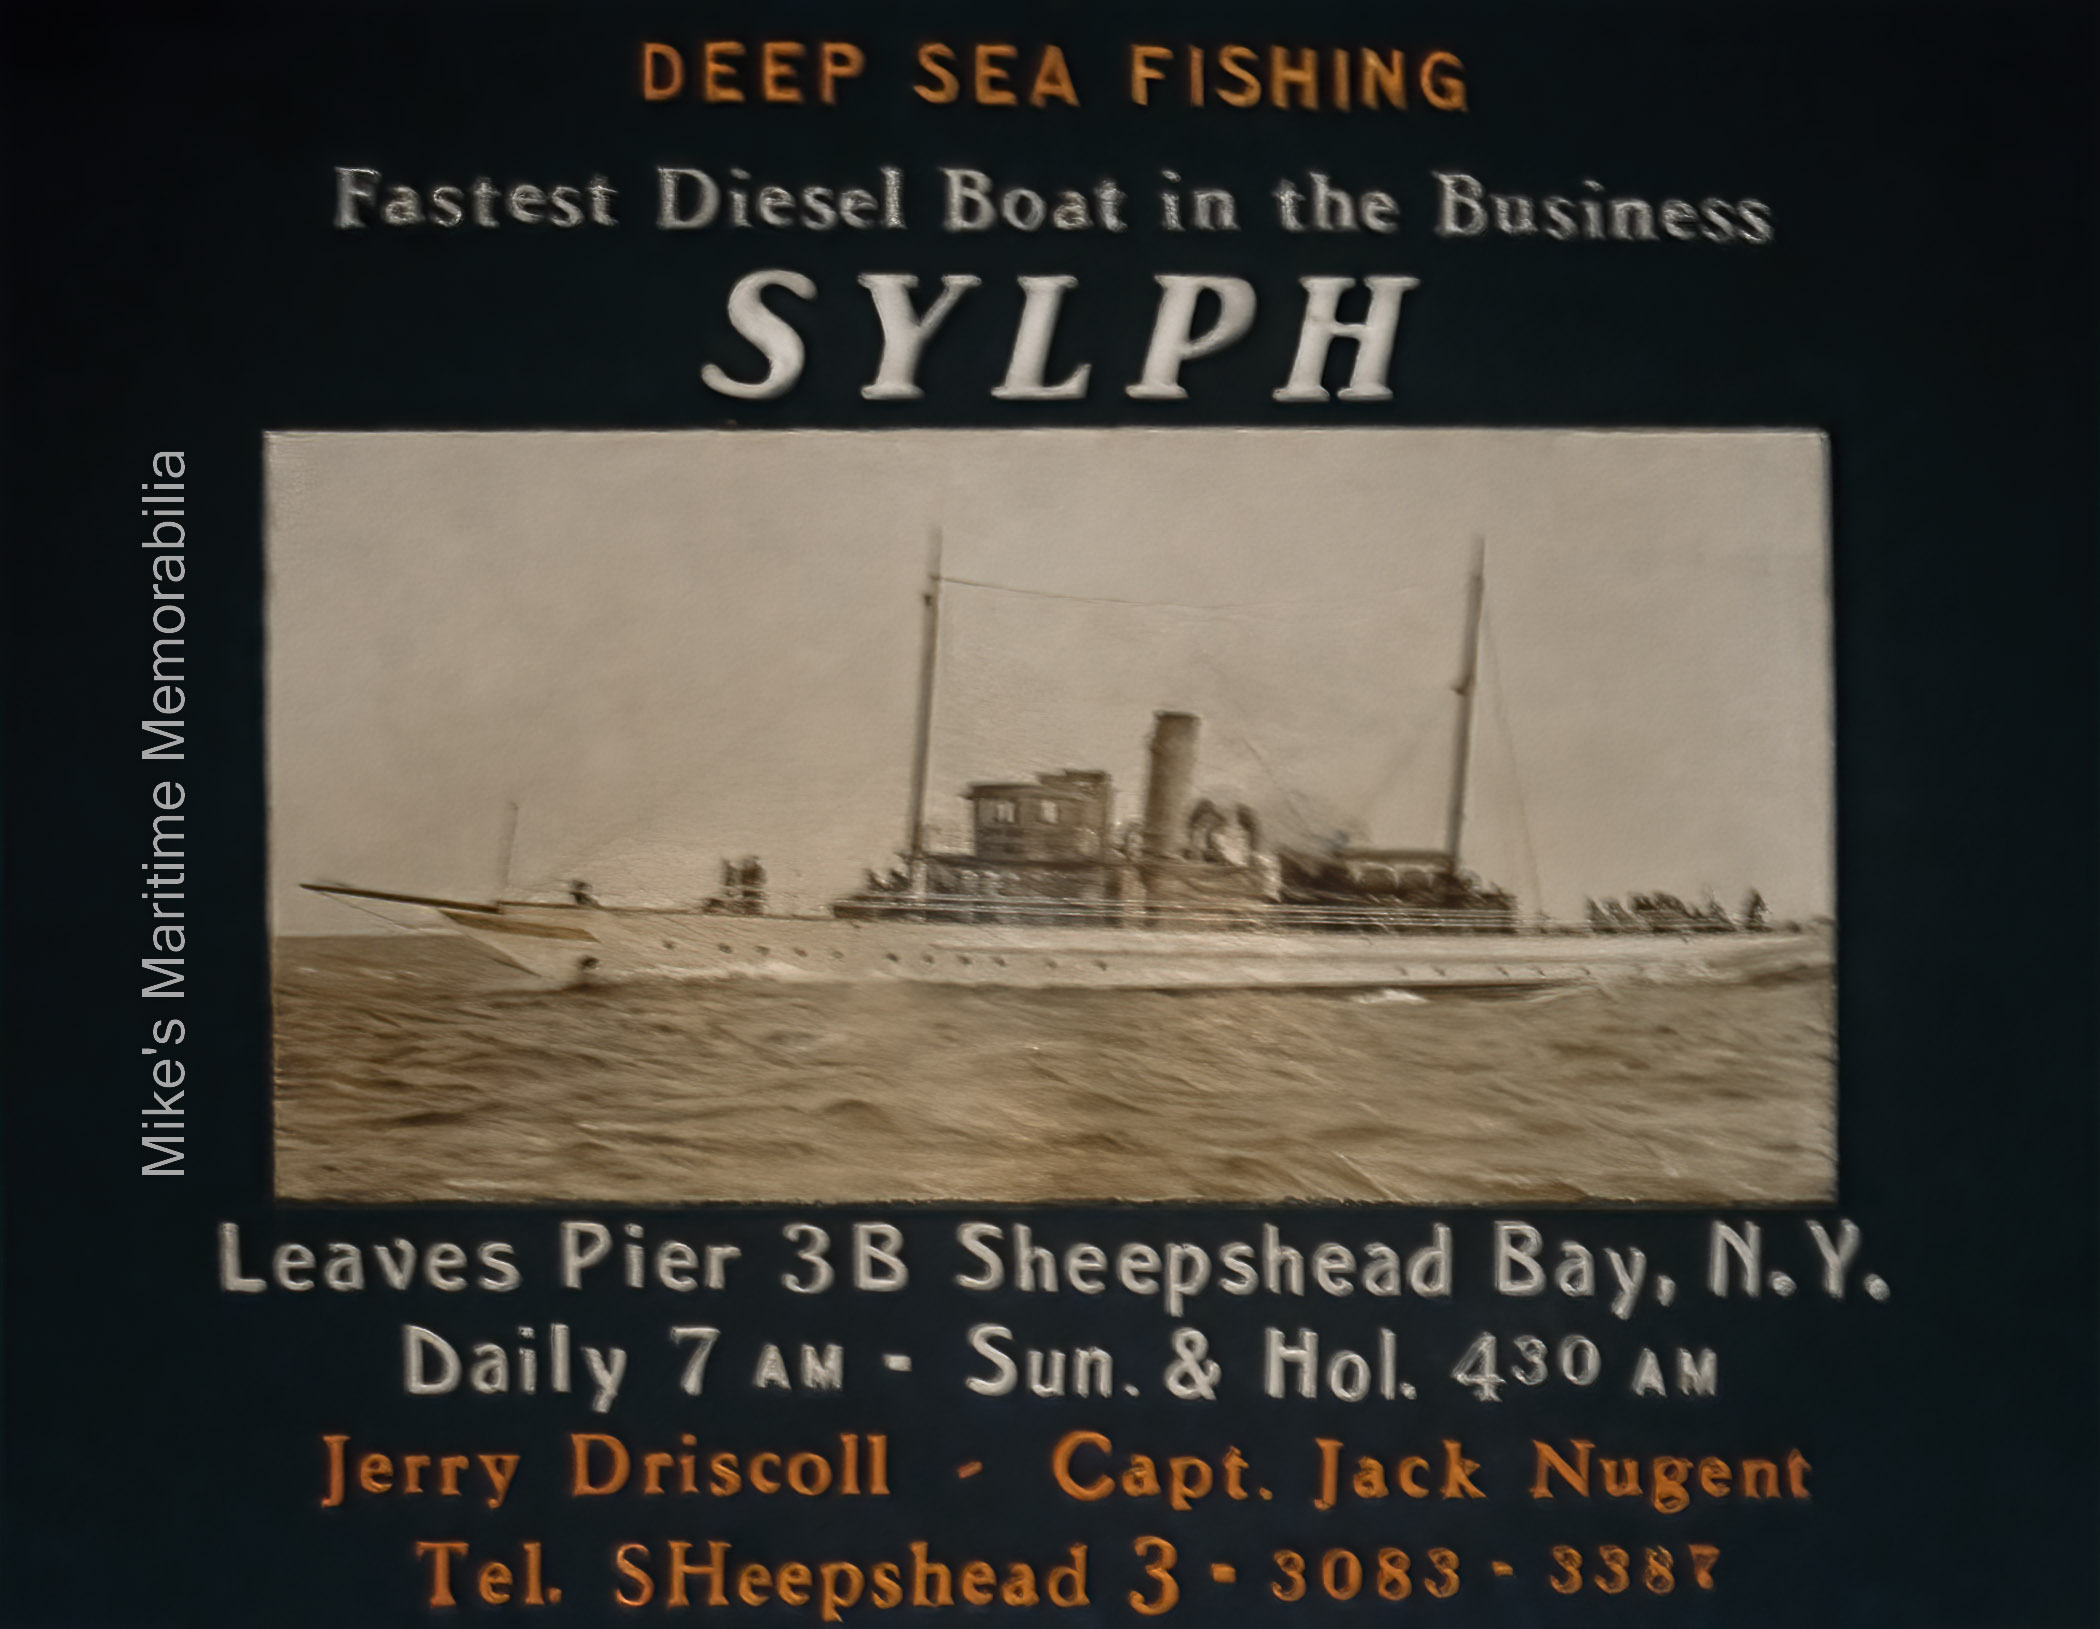 SYLPH Advertising Sign, Brooklyn, NY – 1935 The "SYLPH" was built in 1898 by John Roach & Co. at Chester, PA as the official Presidential Yacht for U.S. Presidents McKinley (1898-1901), Roosevelt (1901-1909), Taft (1909-1913) and Wilson (1913-1921). In 1921, the Navy re-designated her as Patrol Yacht "PY-5" and she sailed on the Potomac and Anacostia Rivers. She was decommissioned by the U.S. Navy in 1930 and purchased by Frank Clair and his partner Captain John Nugent and converted for party boat fishing. She continued to sail as a party fishing boat from Sheepshead Bay until 1939 when she joined a ferry service and took passengers from Sea Gate, Brooklyn to the Battery in Manhattan.